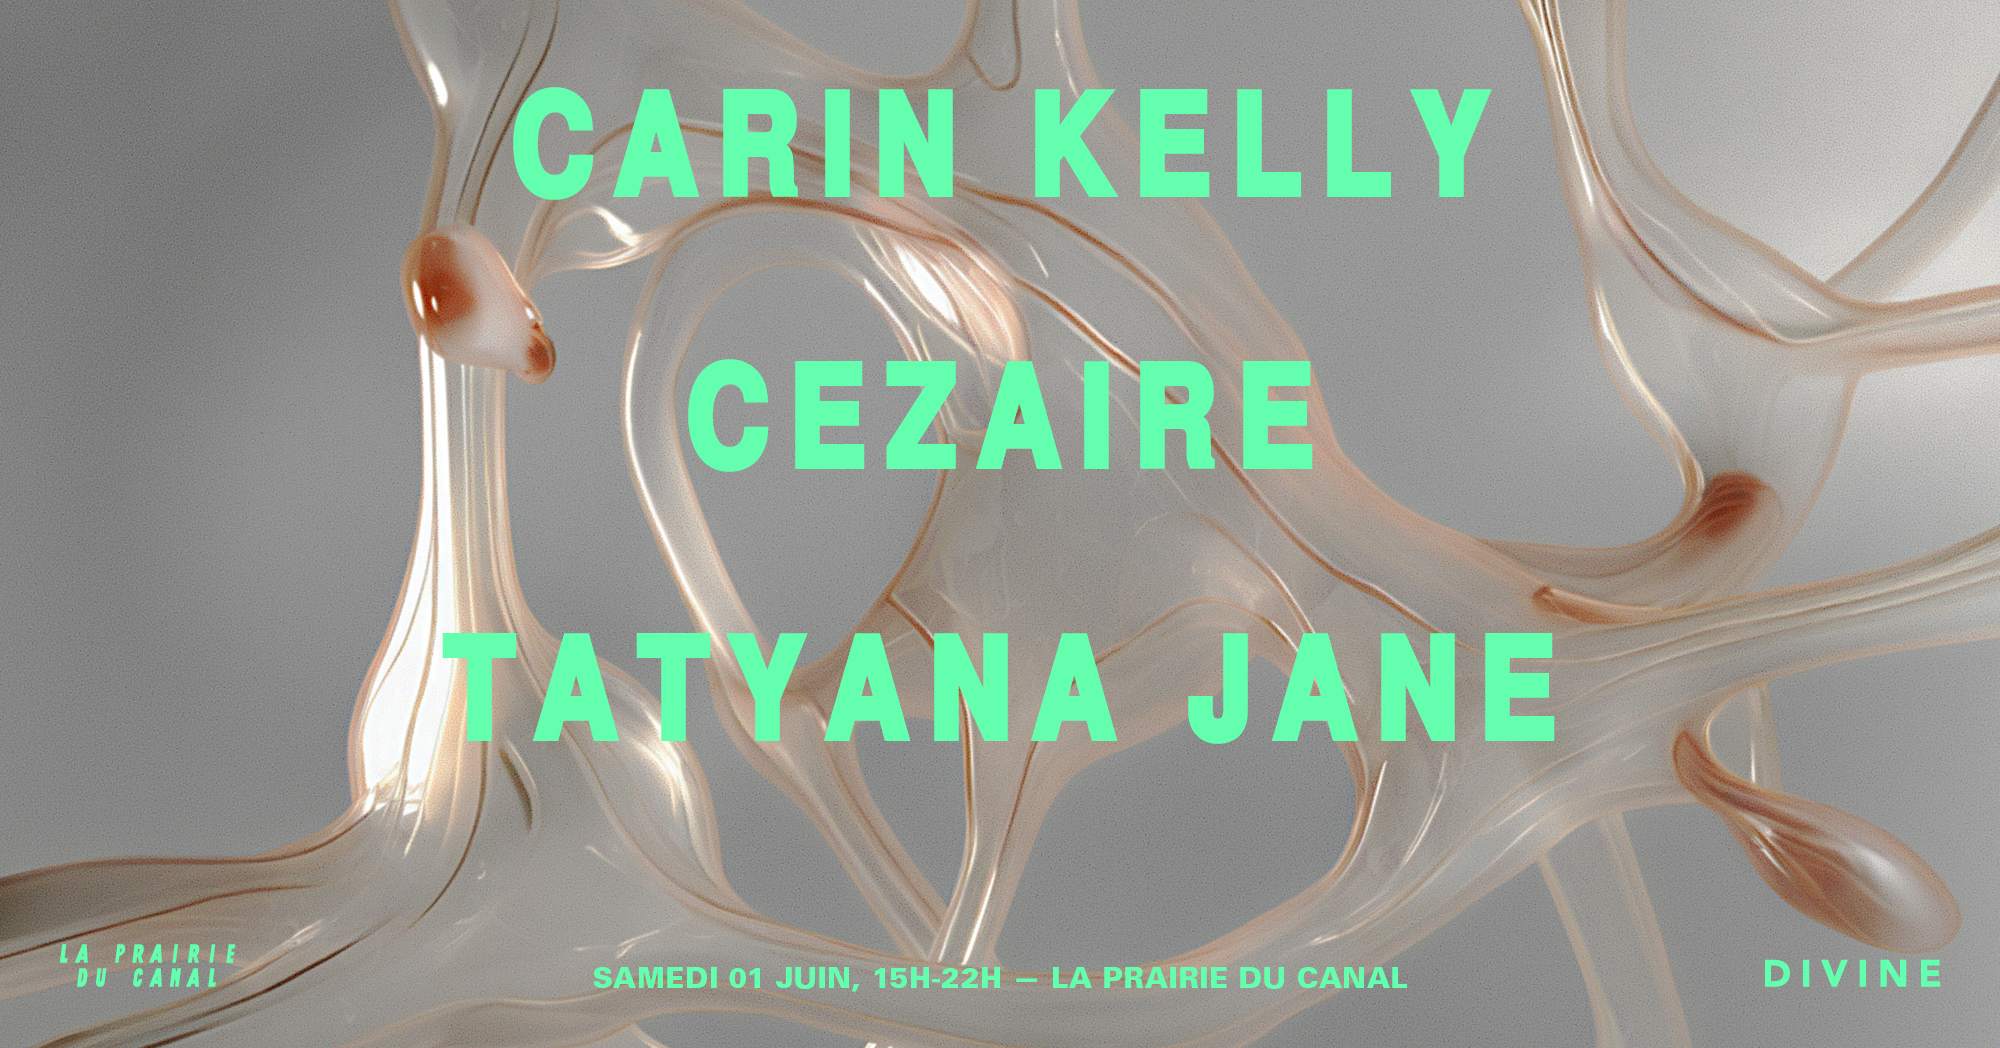 CANCELLED - REPORT - OPEN AIR DIVINE - carin kelly, Cezaire, Tatyana Jane - フライヤー表